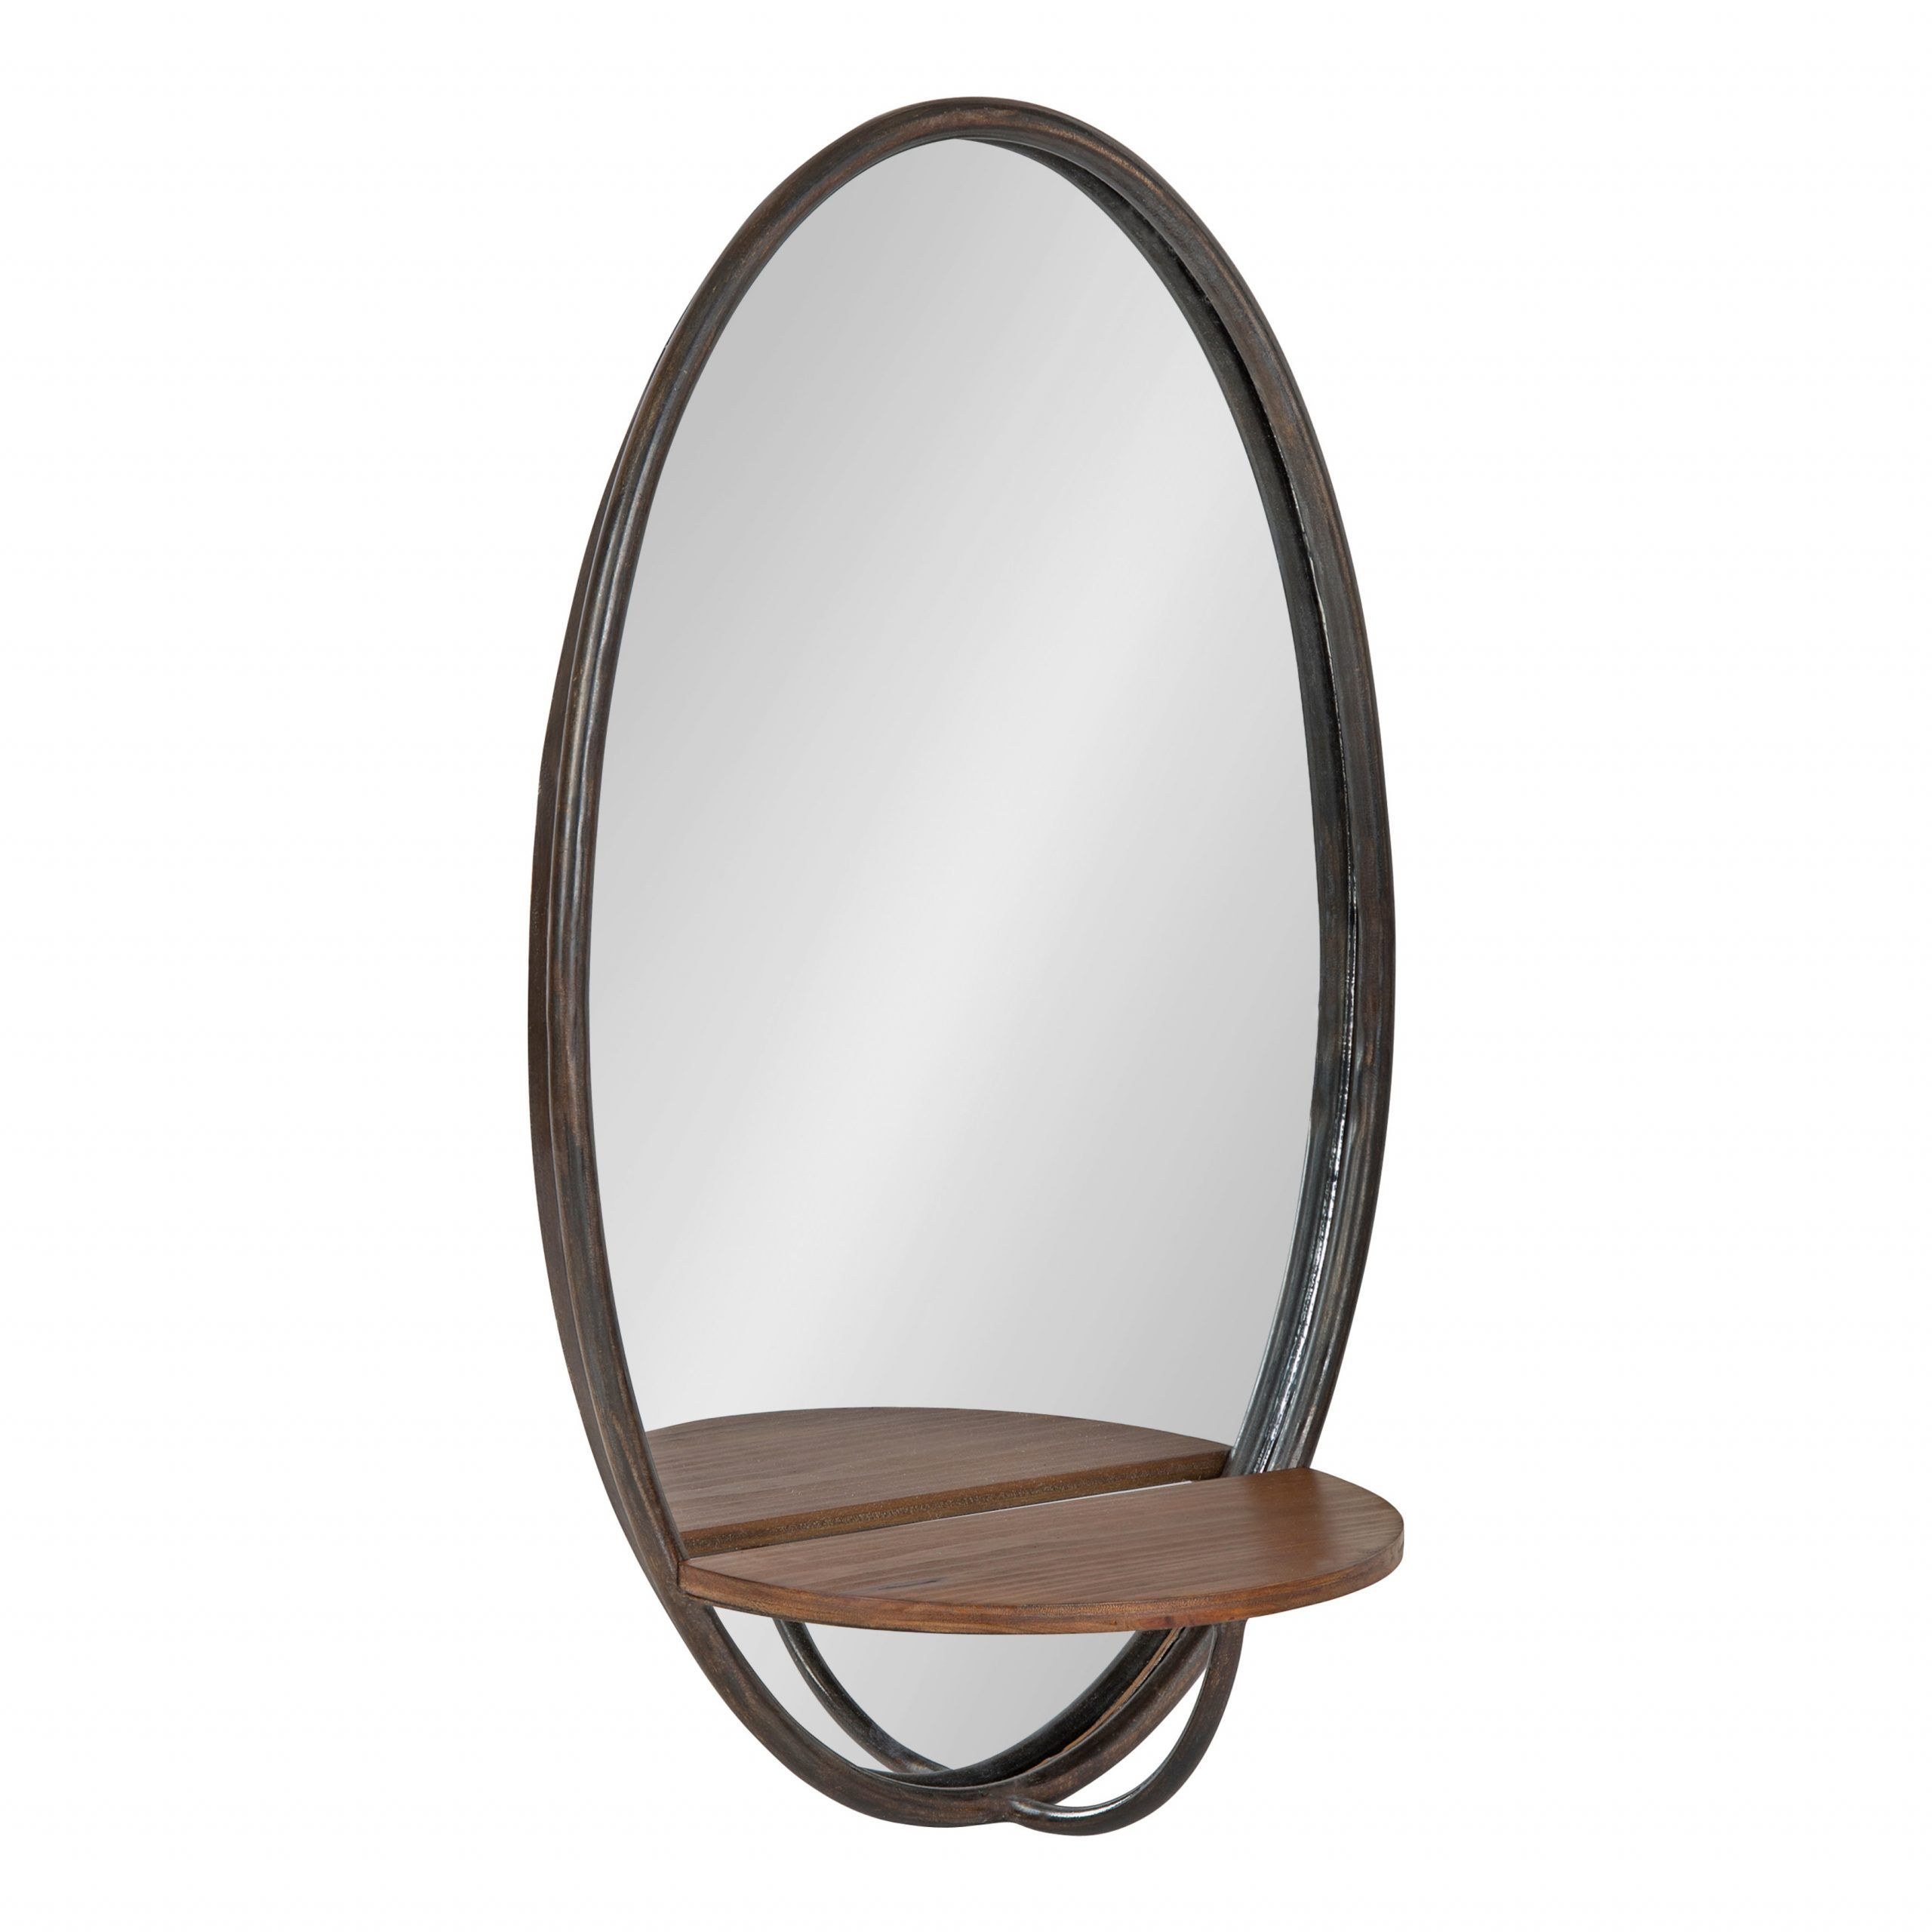 Kate And Laurel Gita Rustic Oval Wall Mirror With Shelf, 15" X 24 With Regard To Wooden Oval Wall Mirrors (View 7 of 15)